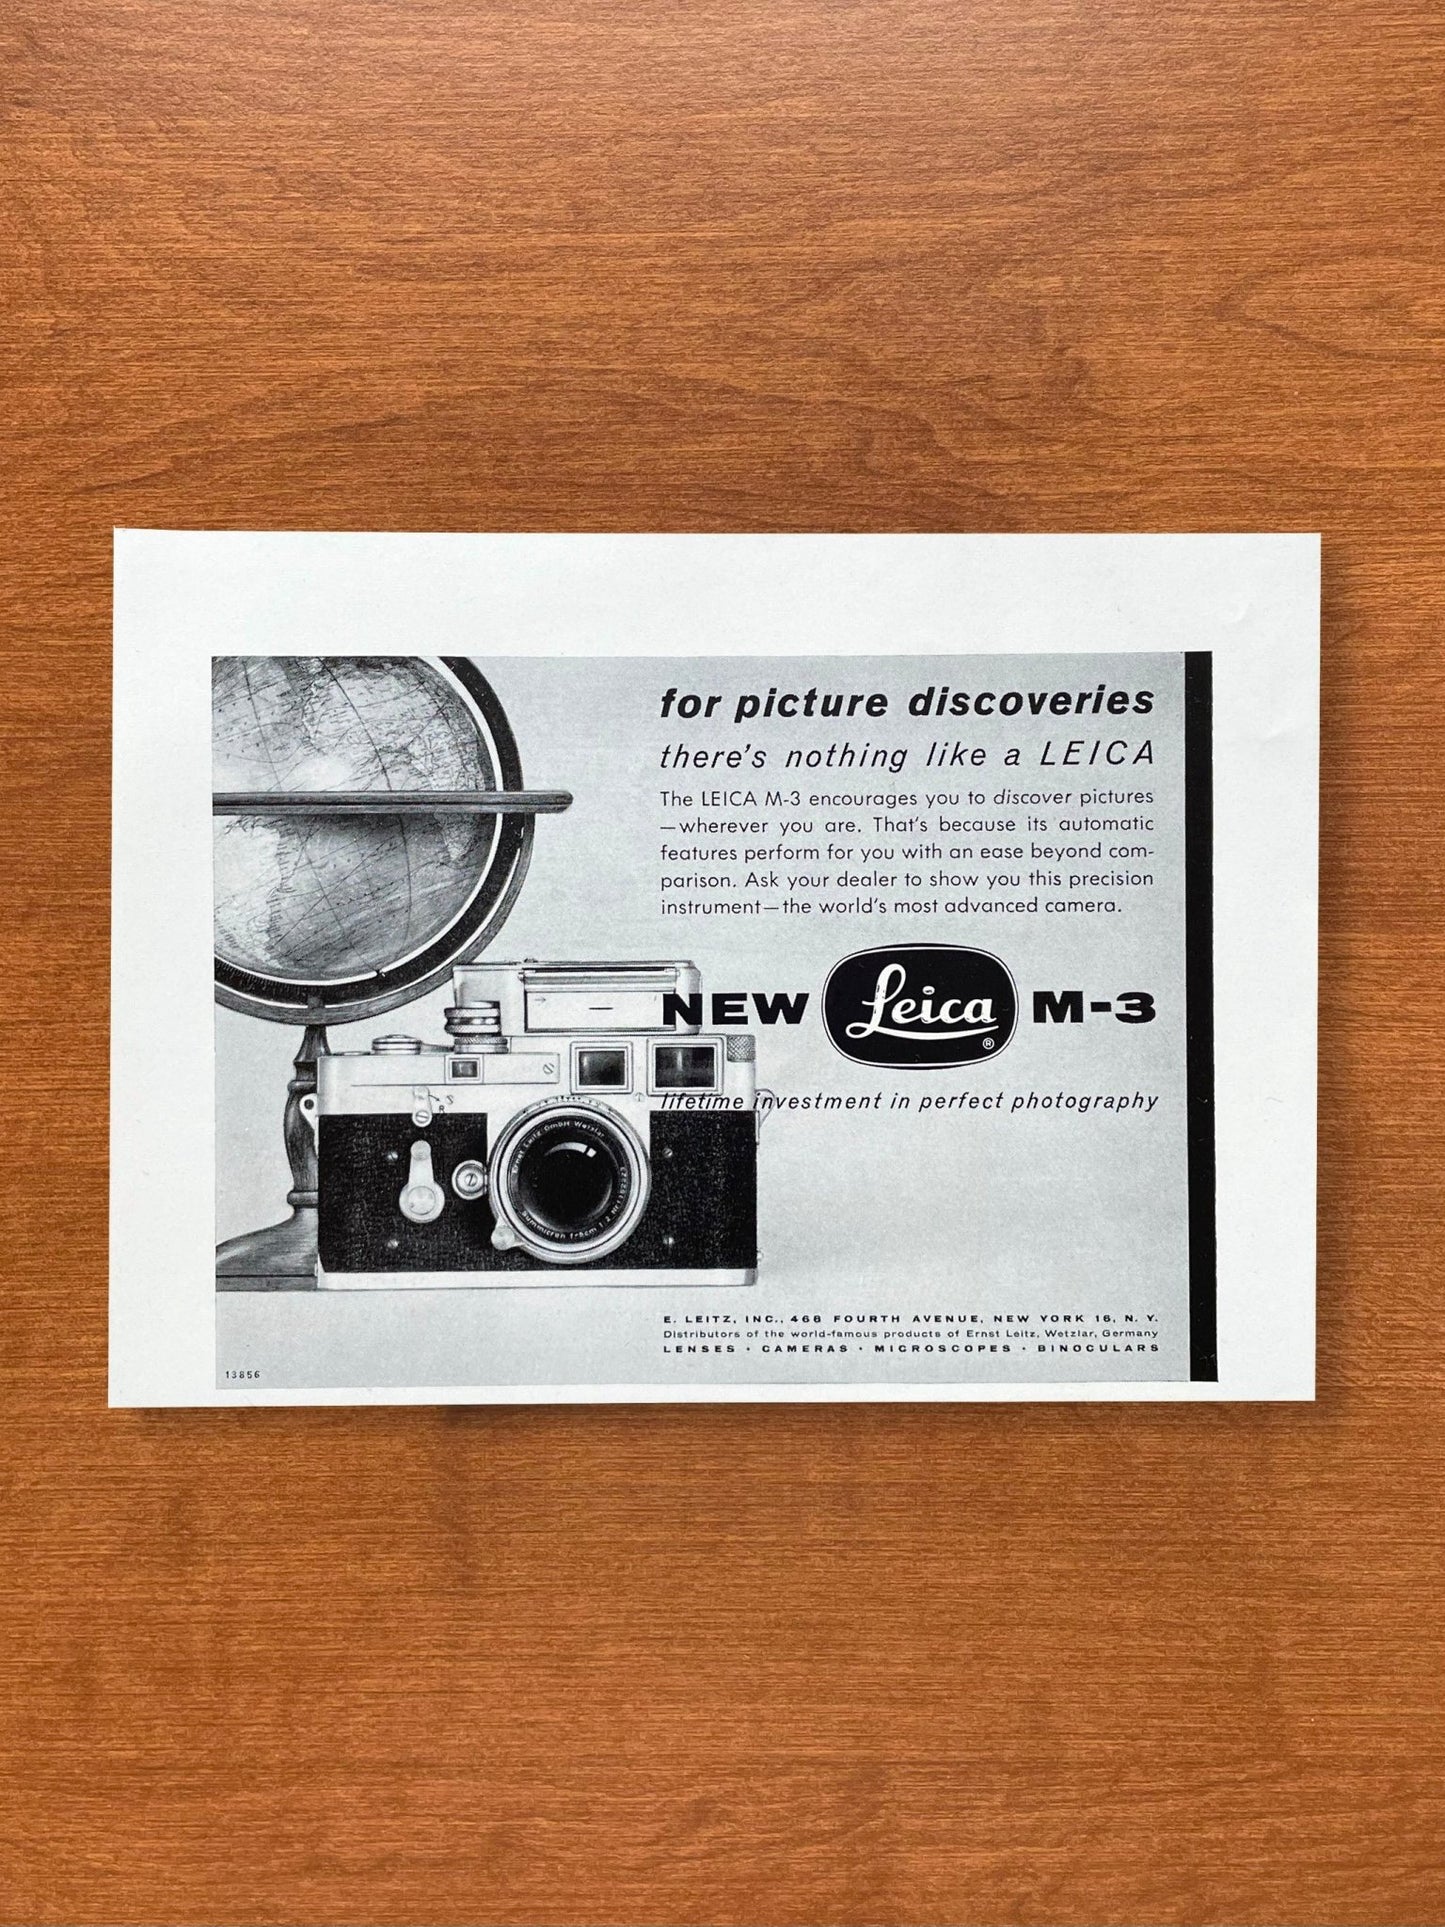 1956 Vintage Leica M3 "for picture discoveries" Advertisement